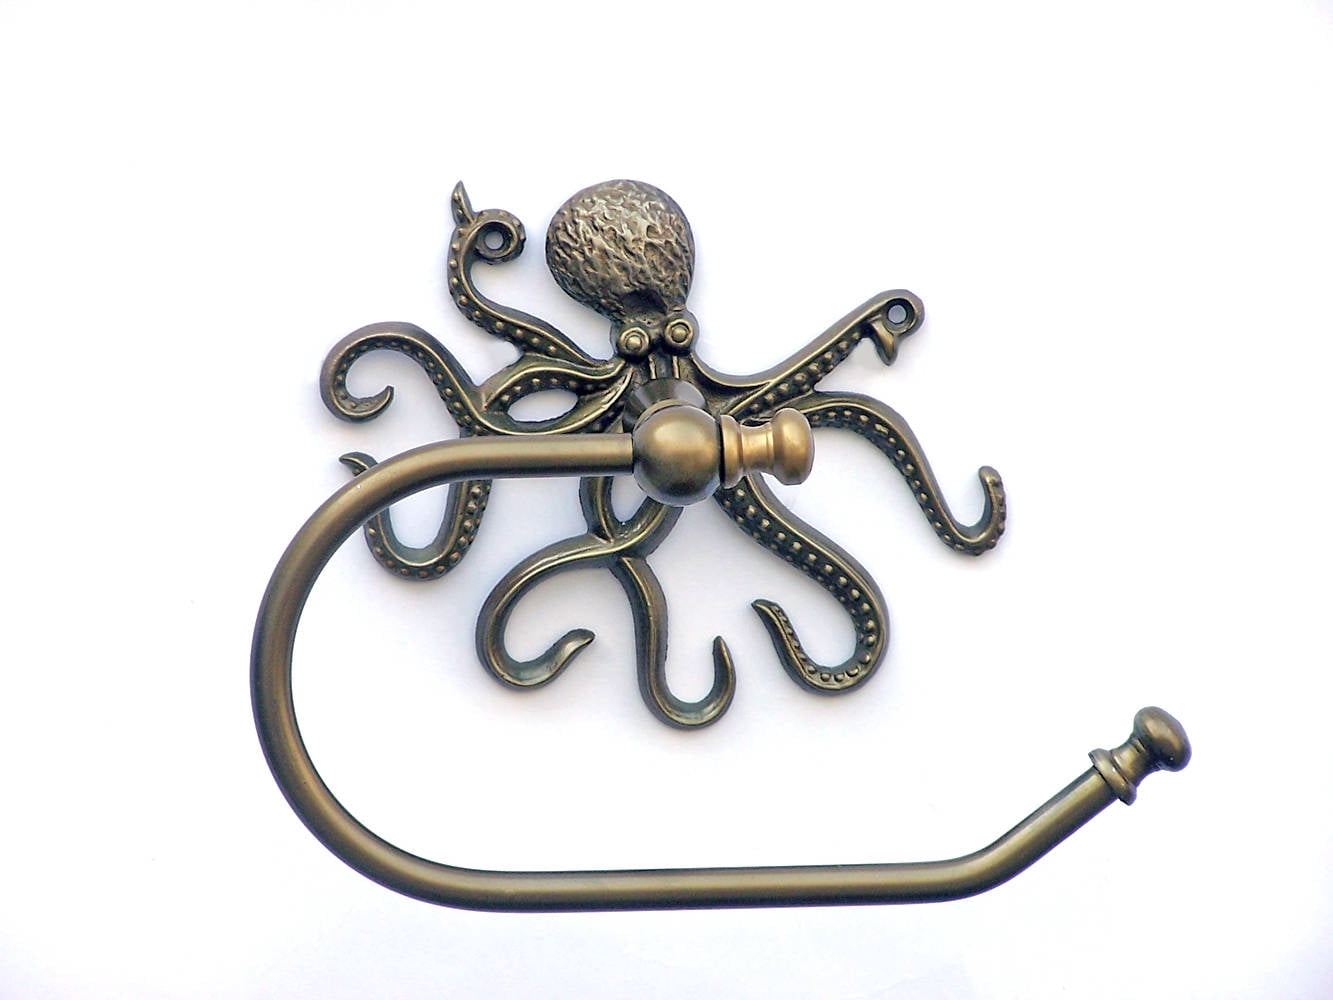 Handcrafted Cast Iron - Antique Brass Octopus Toilet Paper Holder